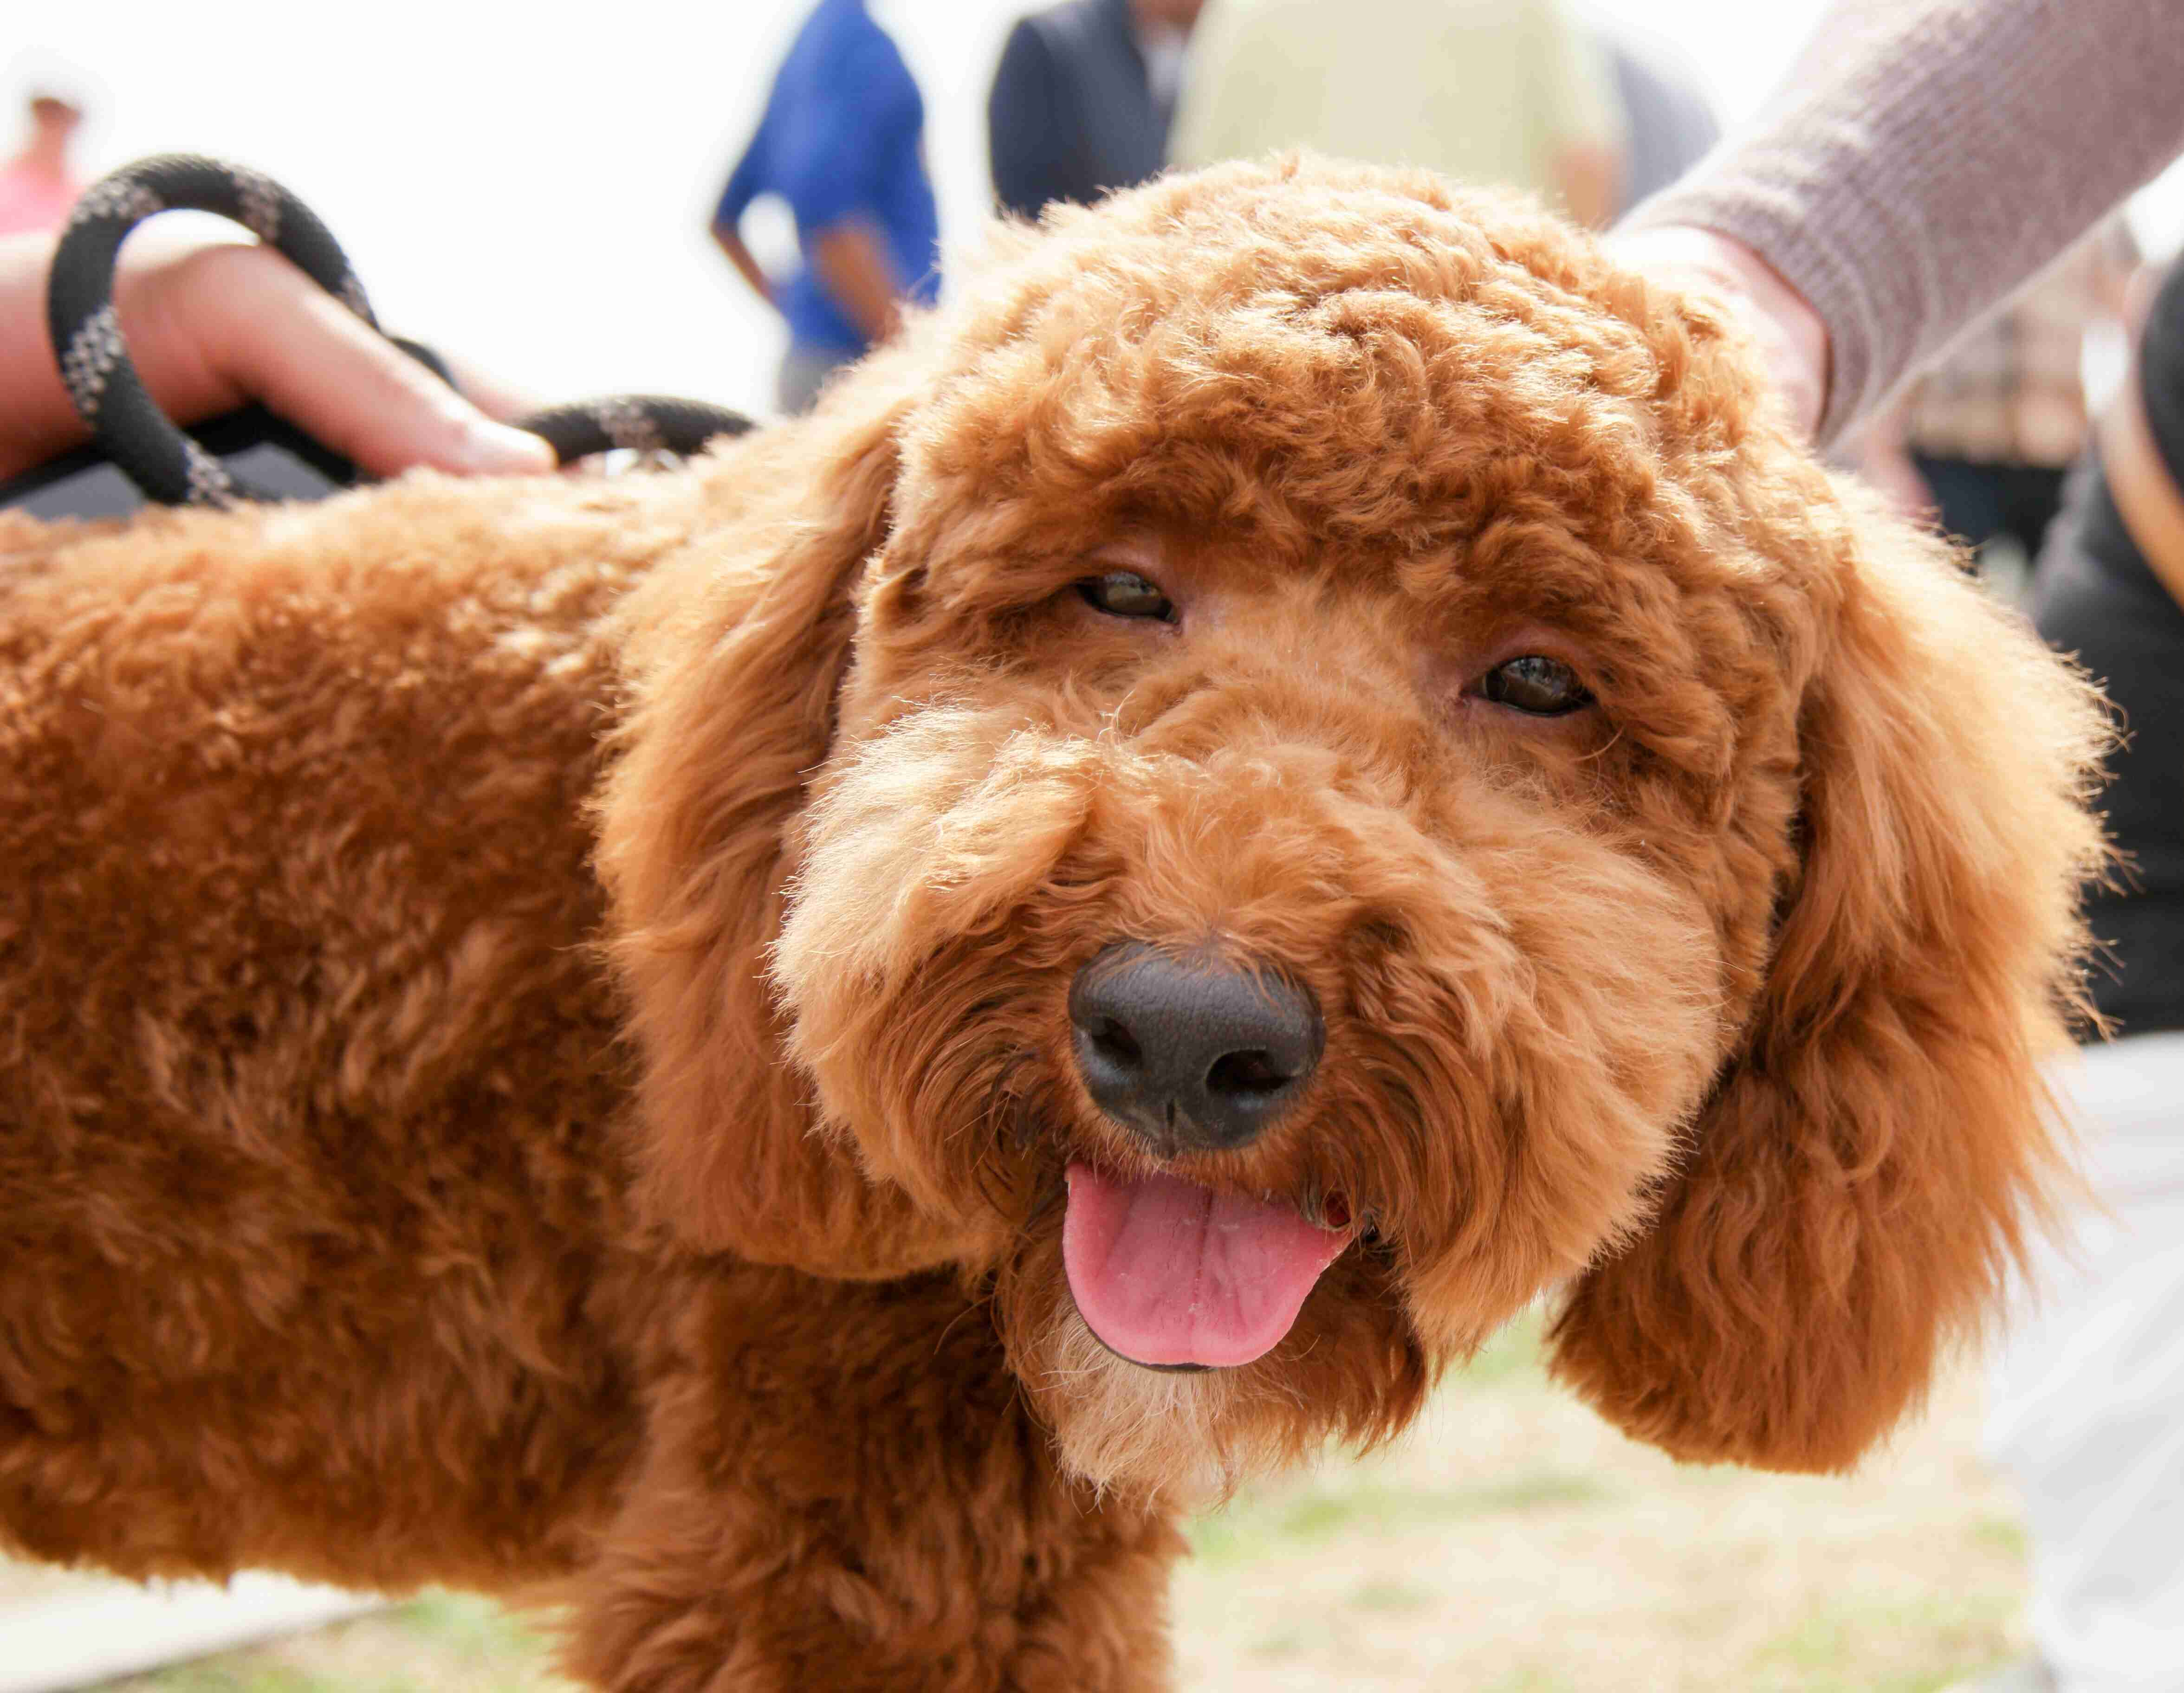 How can owners help manage respiratory issues in Poodles?